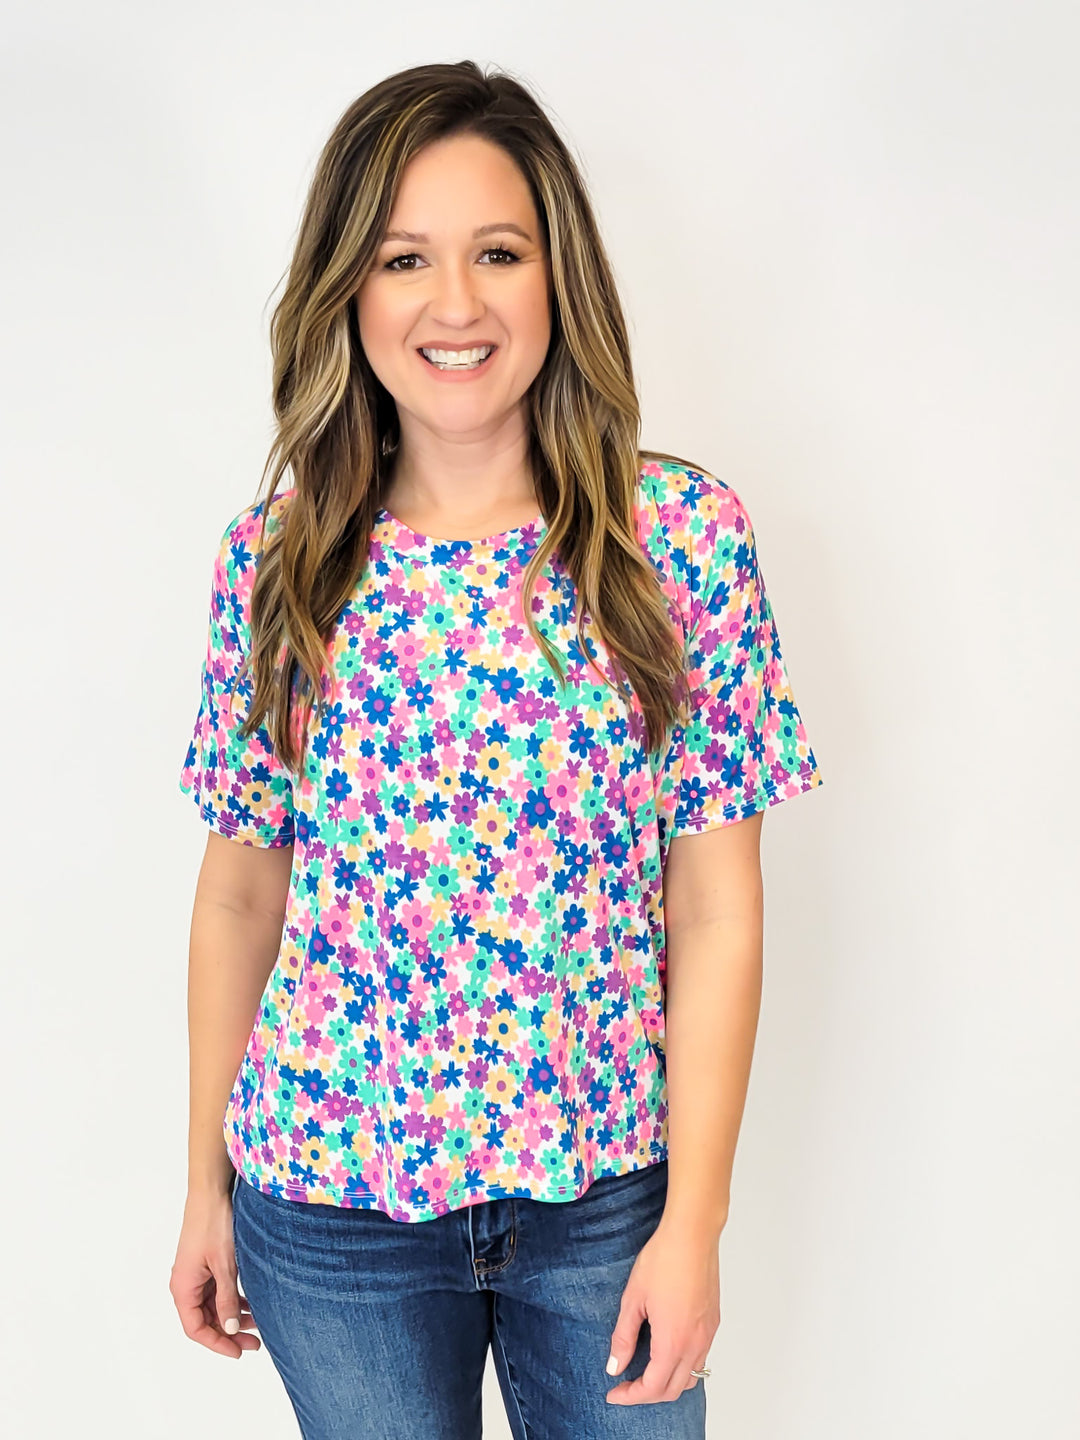 SHORT SLEEVE ROUND NECK FLORAL PRINTED TOP - NEON PINK/ROYAL BLUE